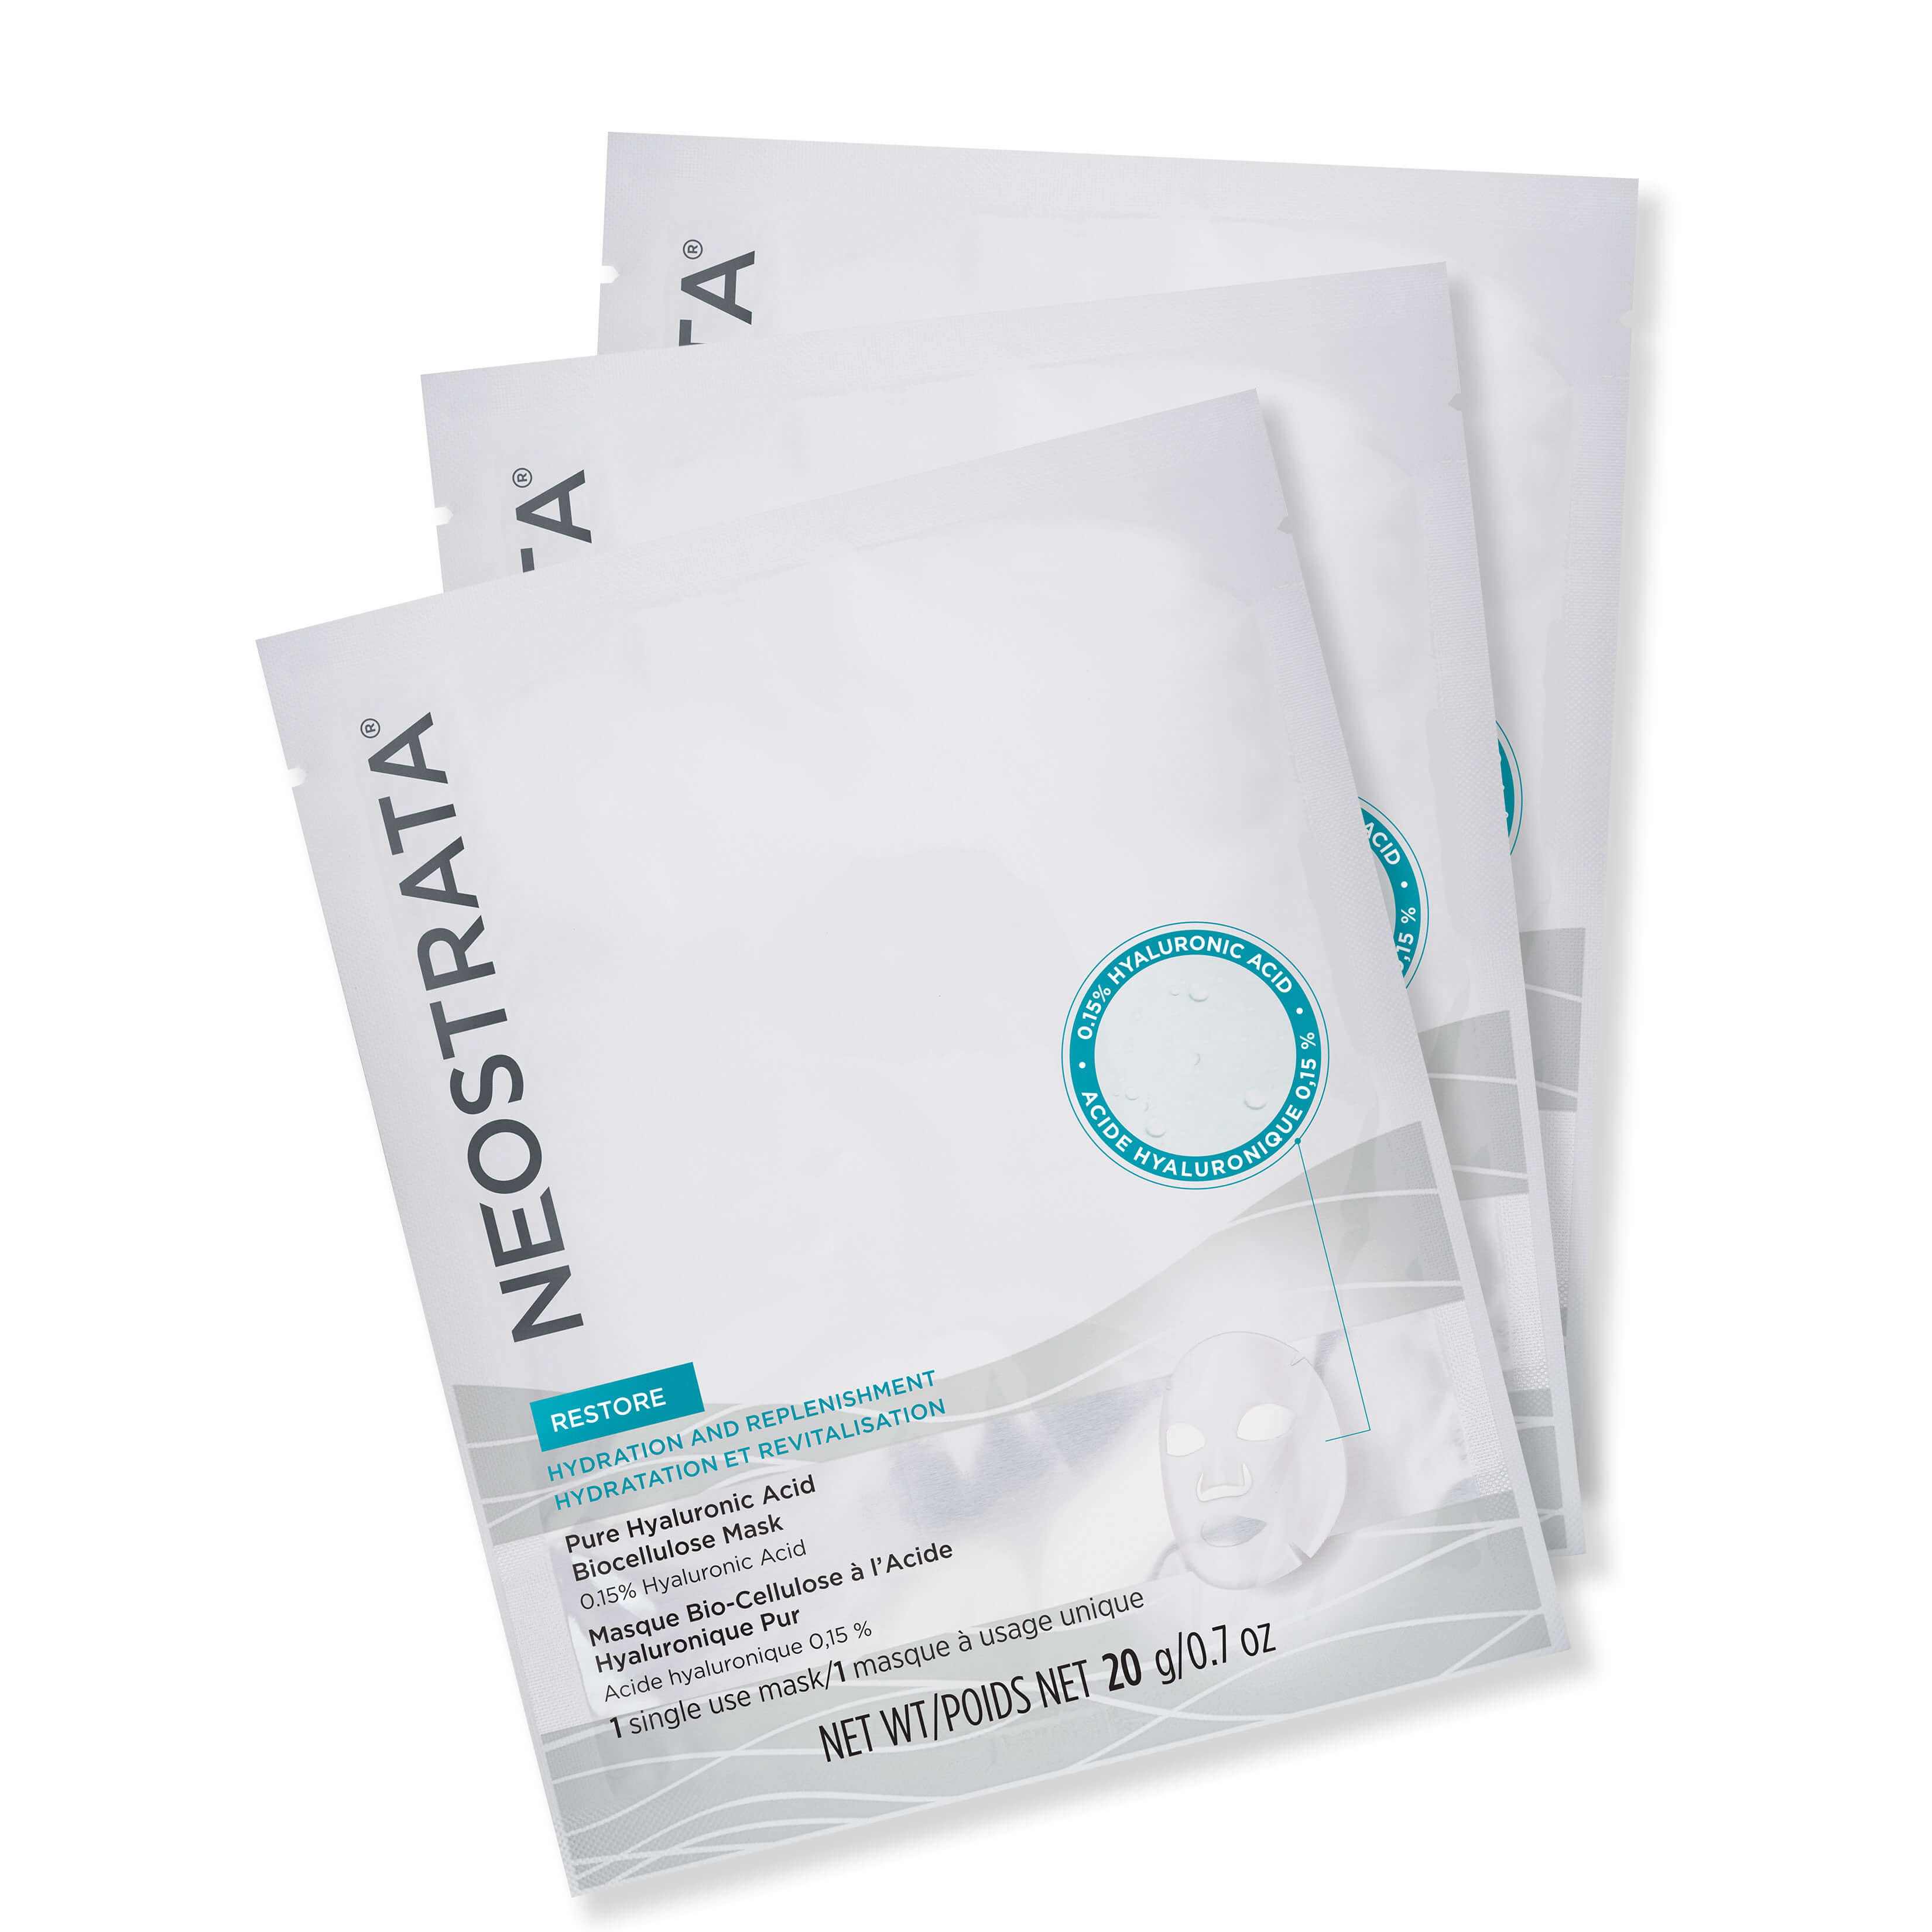 NeoStrata Pure Hyaluronic Acid Biocellulose Mask 3 Pack | Derived From Nourishing Coconut Water, This Biocellulose Mask Is Filled With 0 | Anti-Aging